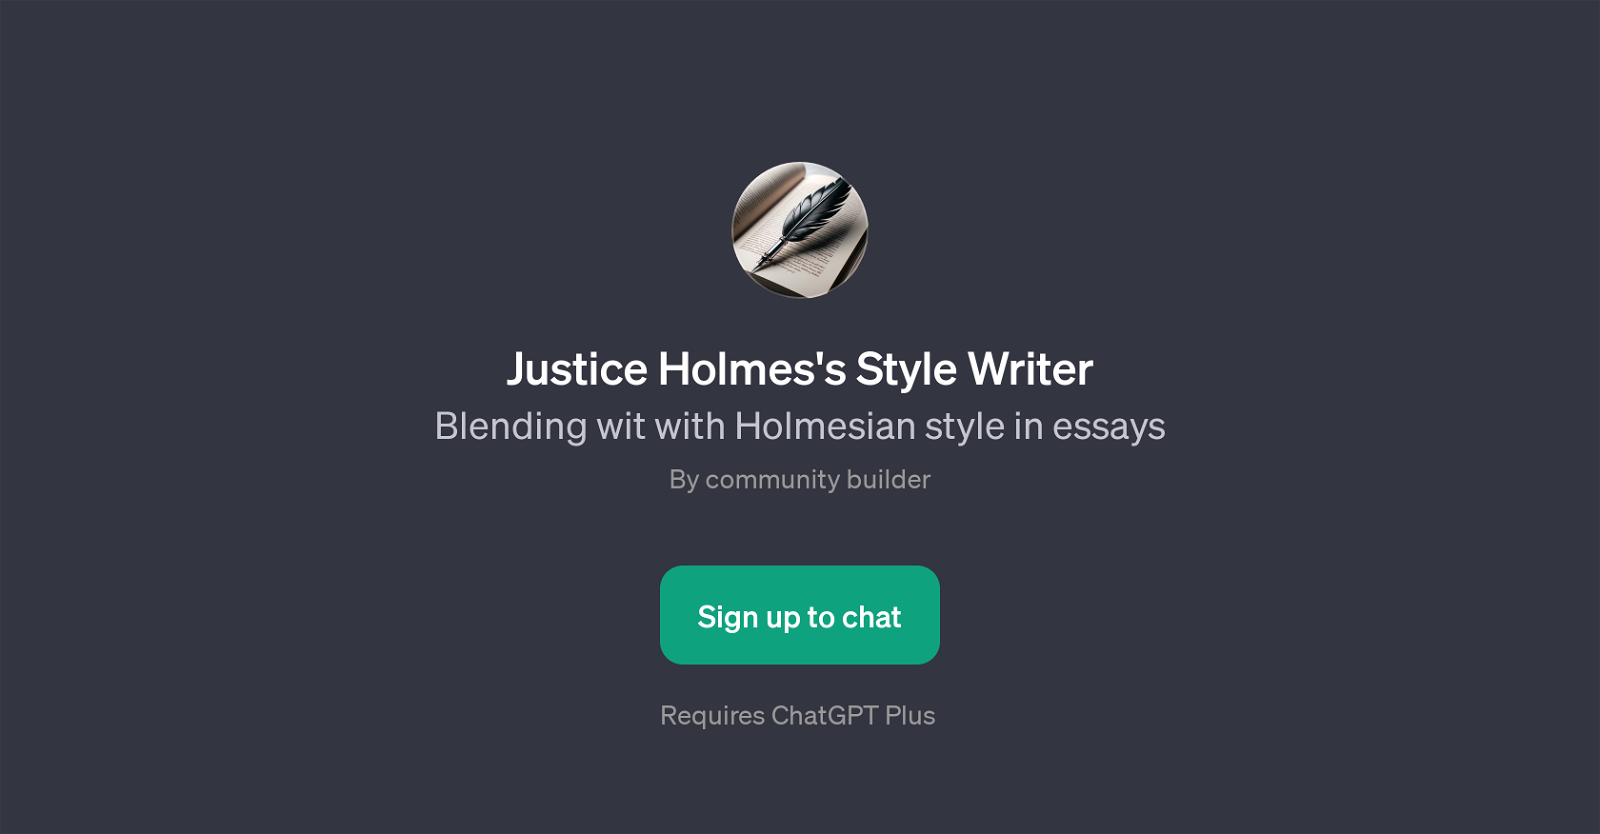 Justice Holmes's Style Writer website